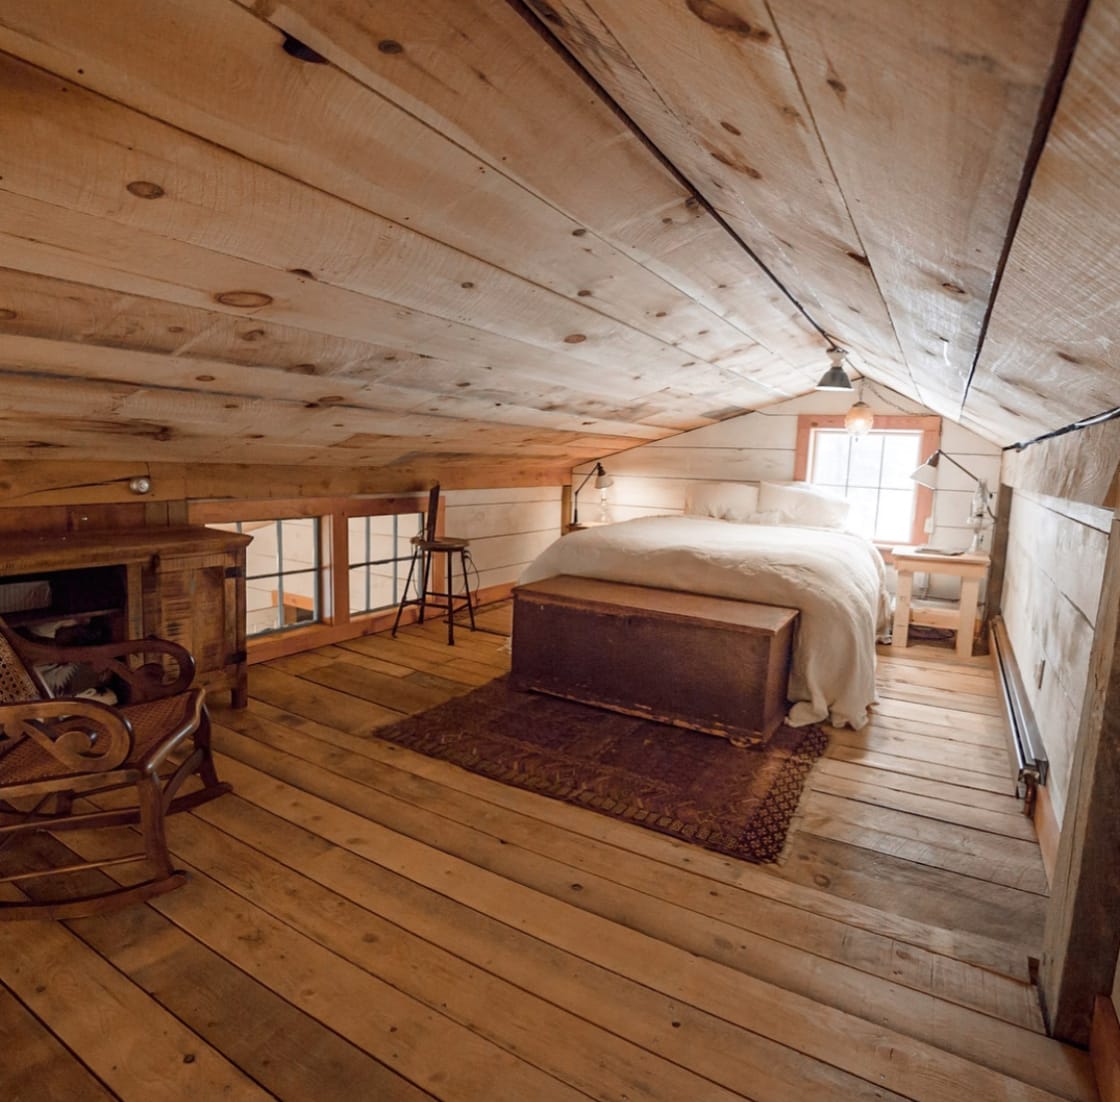 The bedroom is a loft located in the second floor!